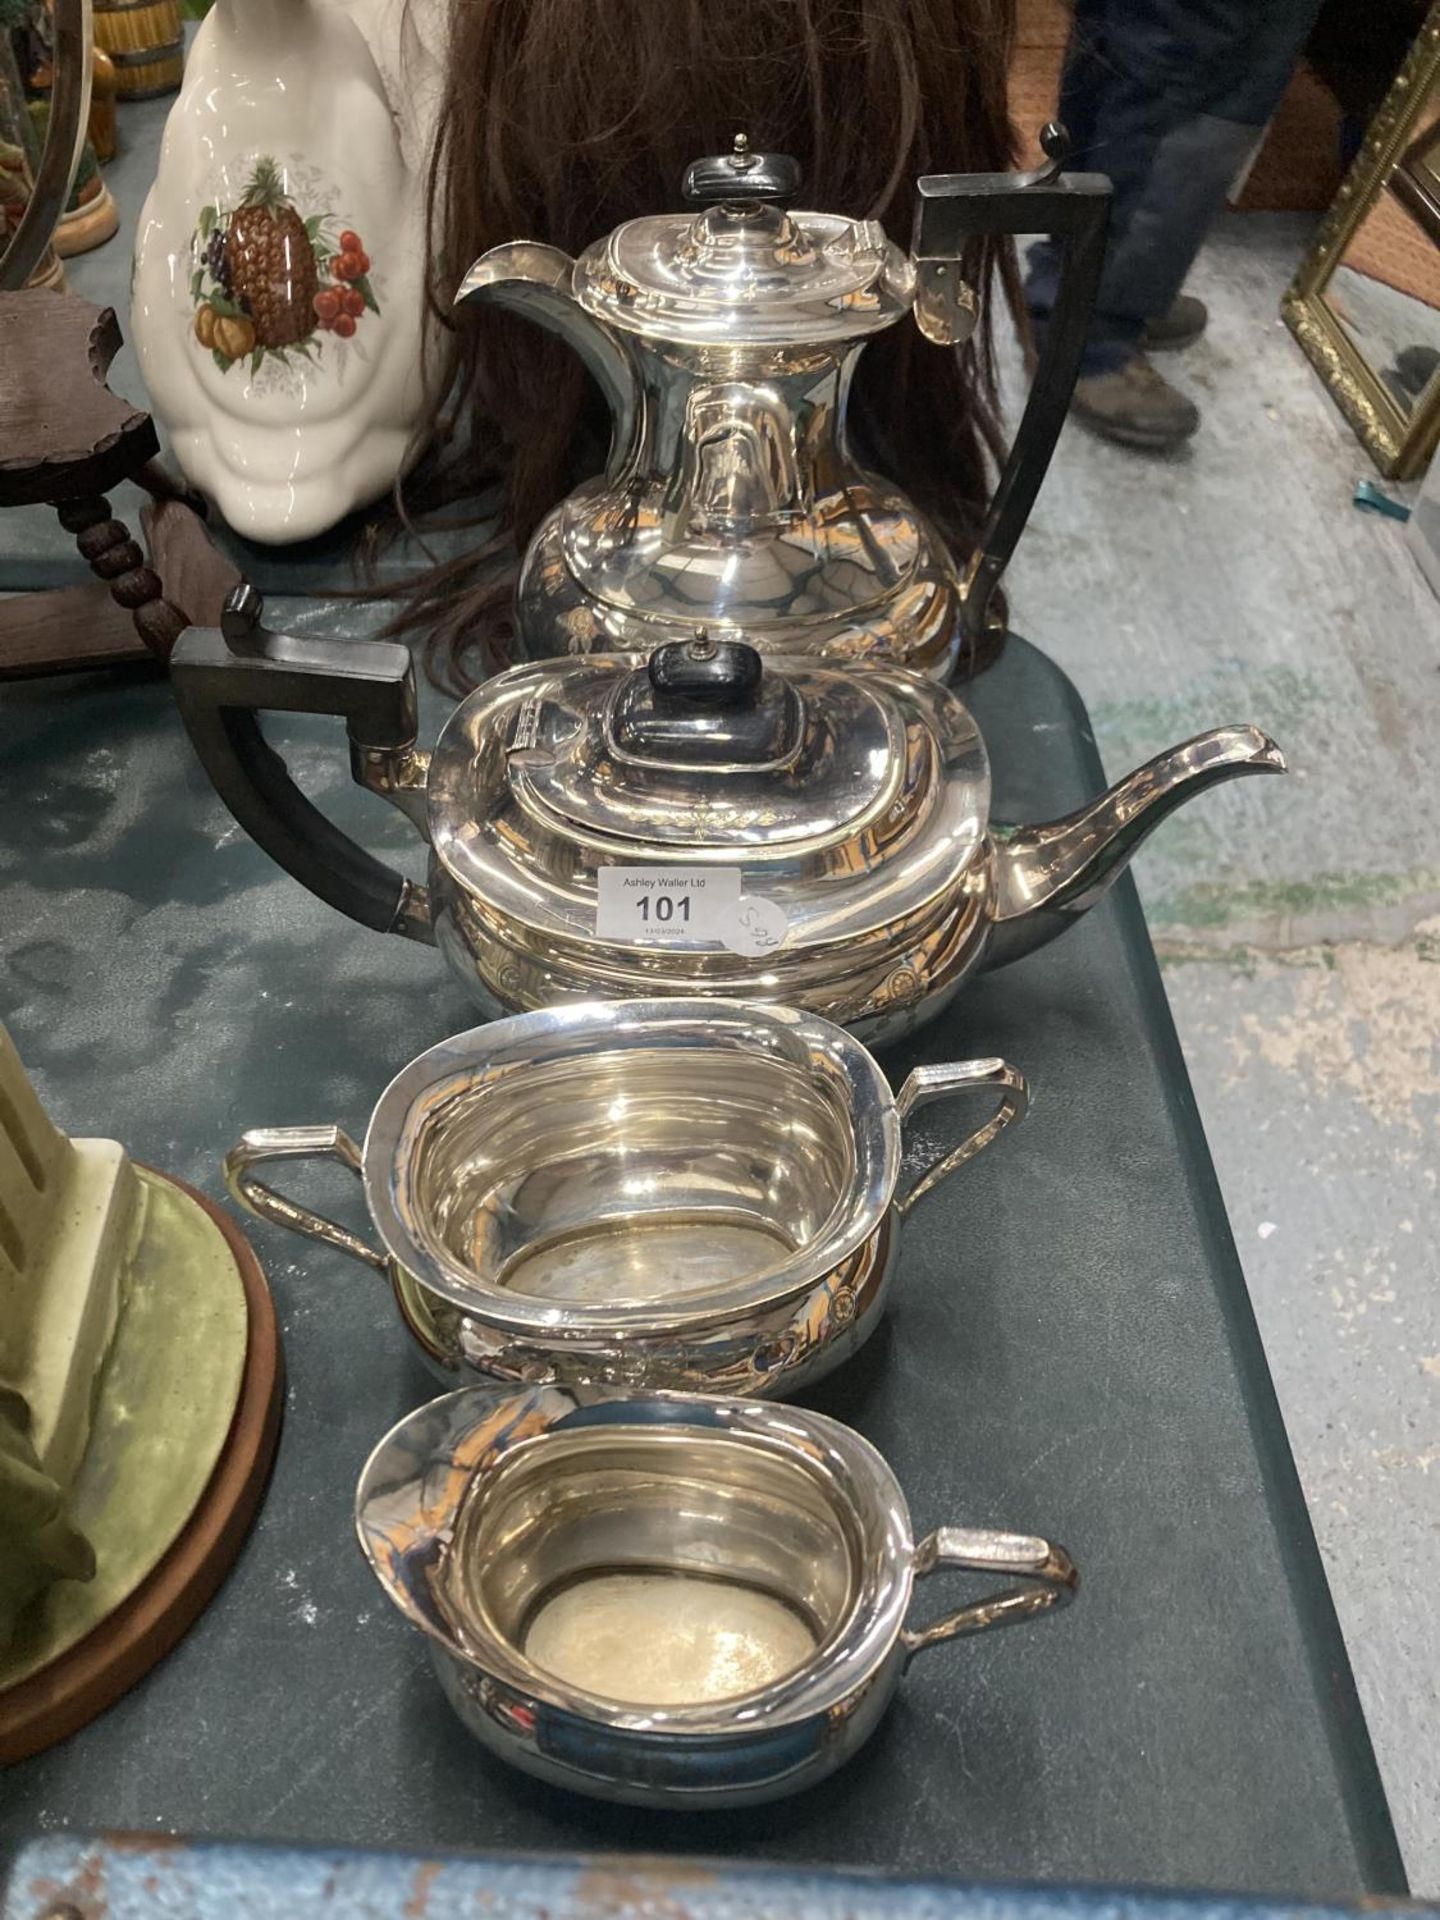 A FOUR PIECE SILVER PLATED TEASET TO INCLUDE A COFFEE POT, TEAPOT, SUGAR BOWL AND CREAM JUG